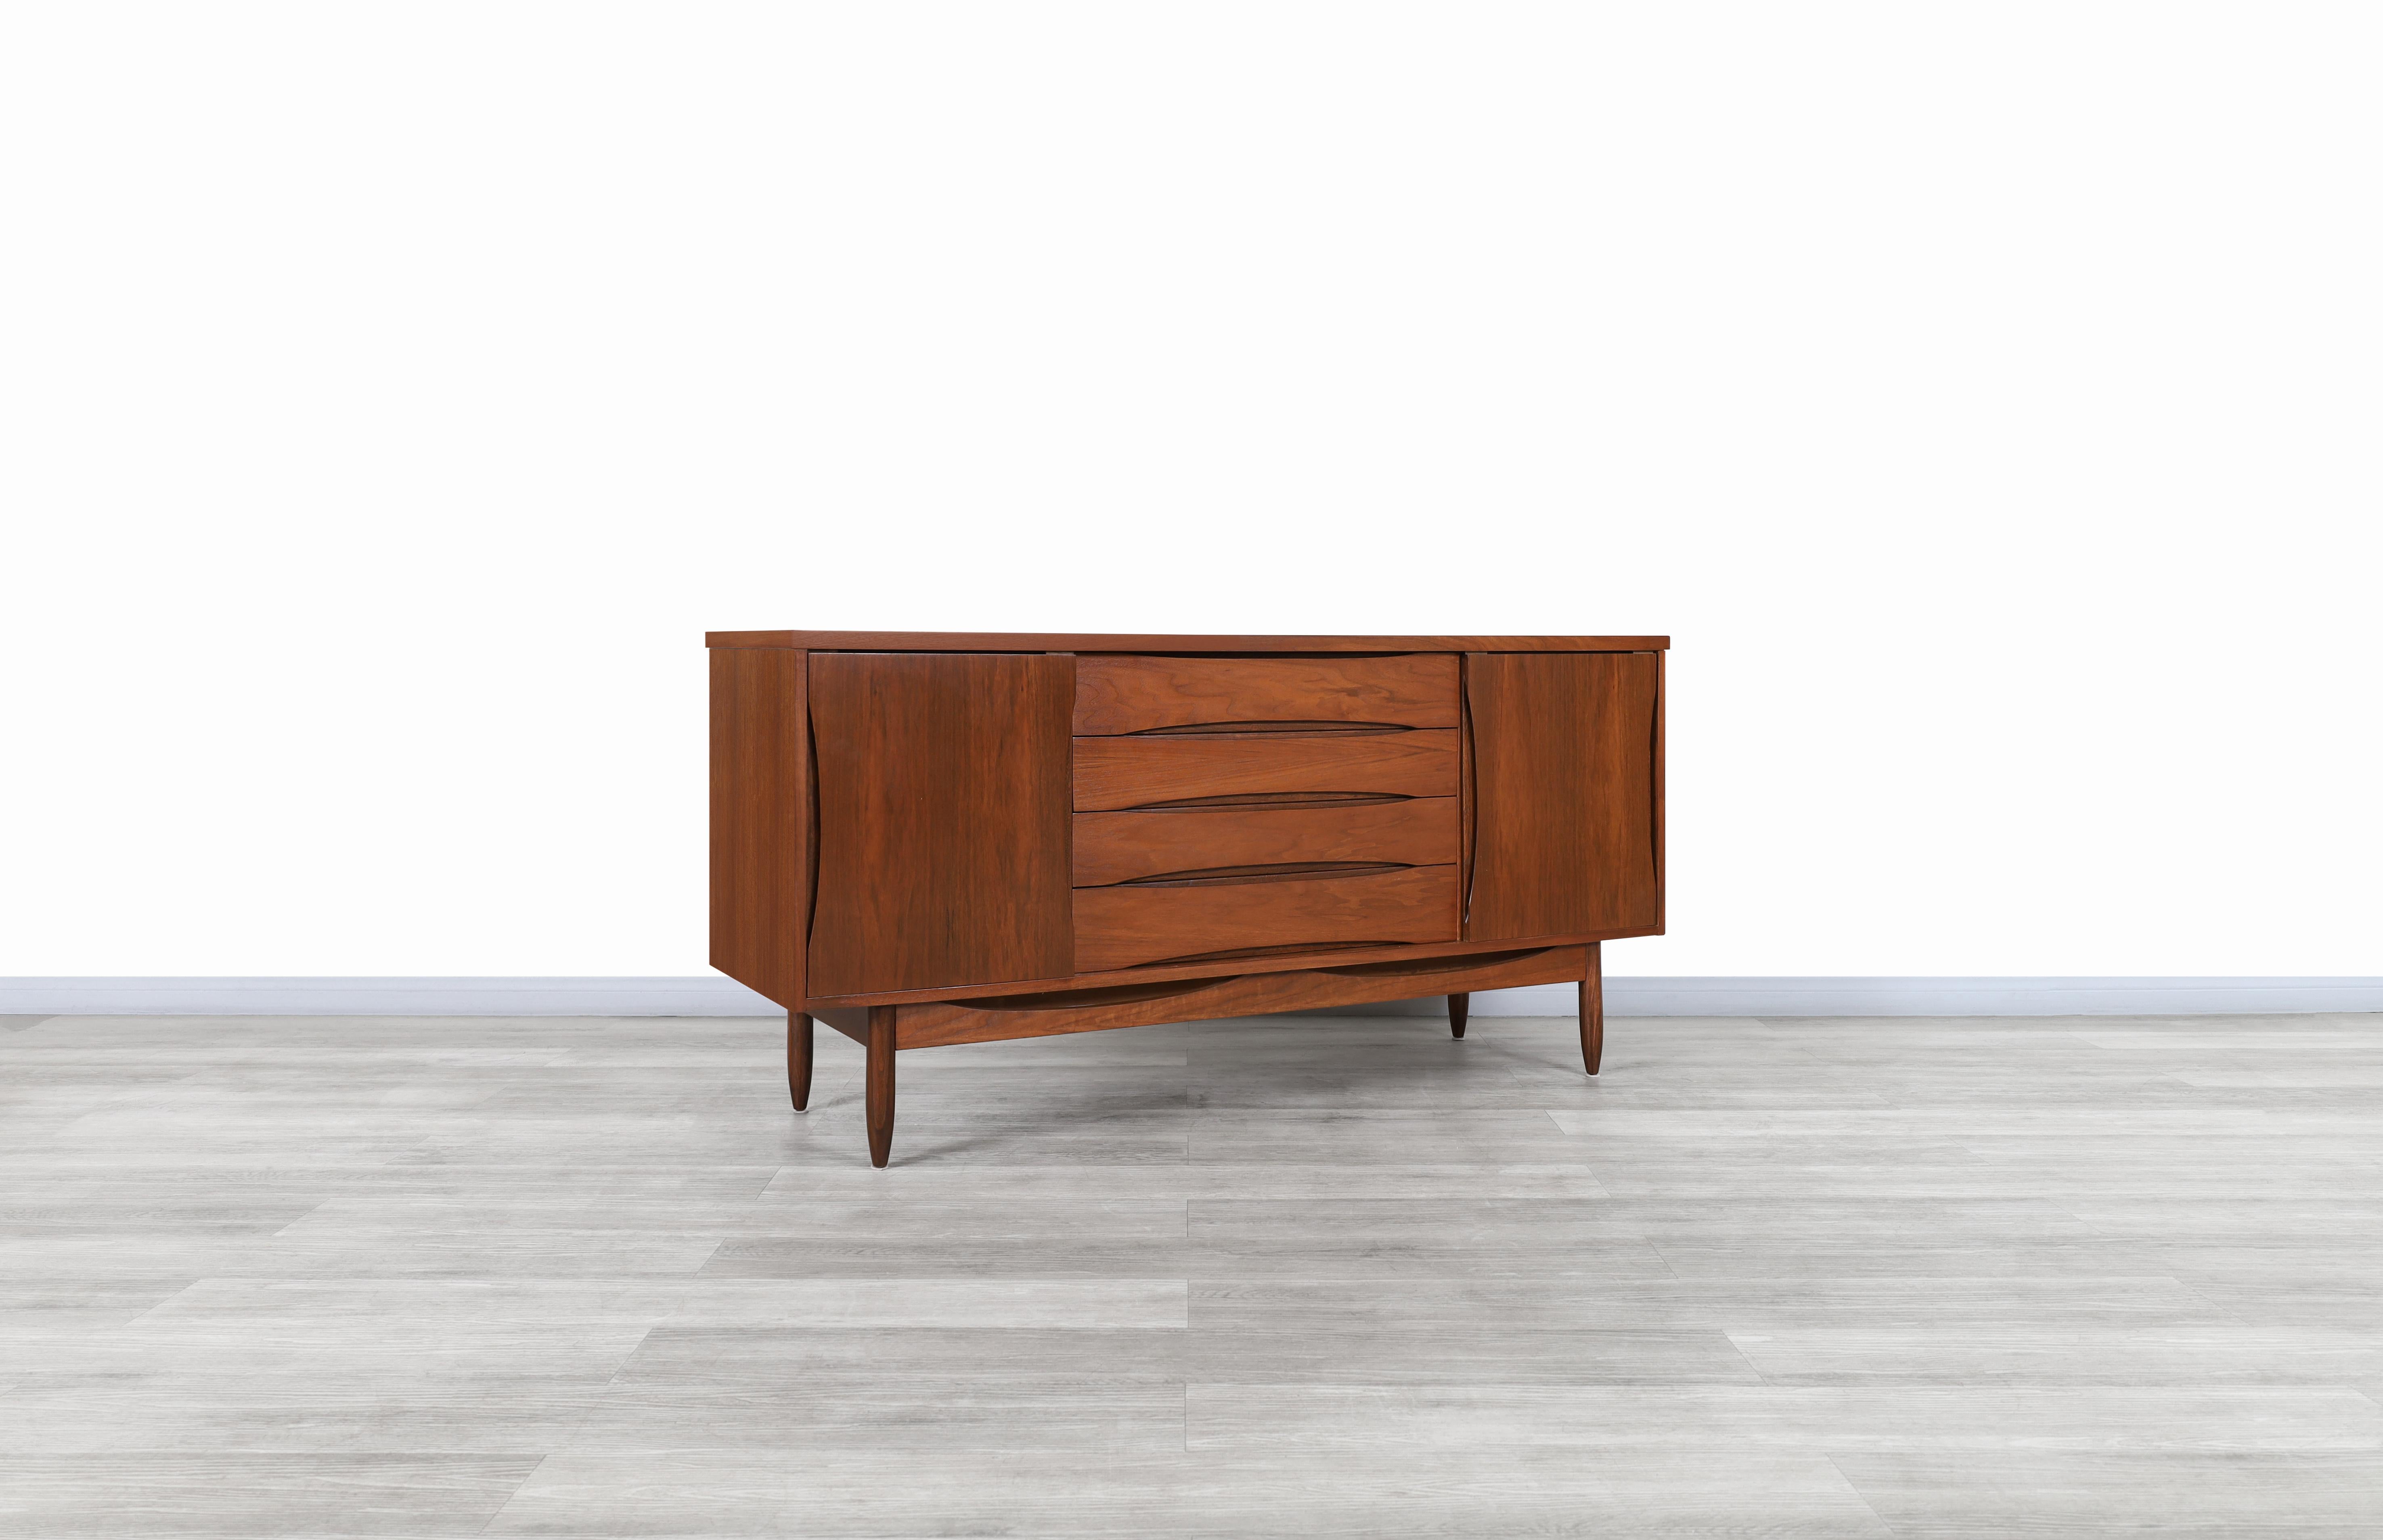 Wonderful Mid-Century Modern walnut credenza designed by Broyhill and manufactured in the United States, circa 1960s. This credenza has a modern design where the walnut wood grains give it a better contrast throughout its entire structure. Features